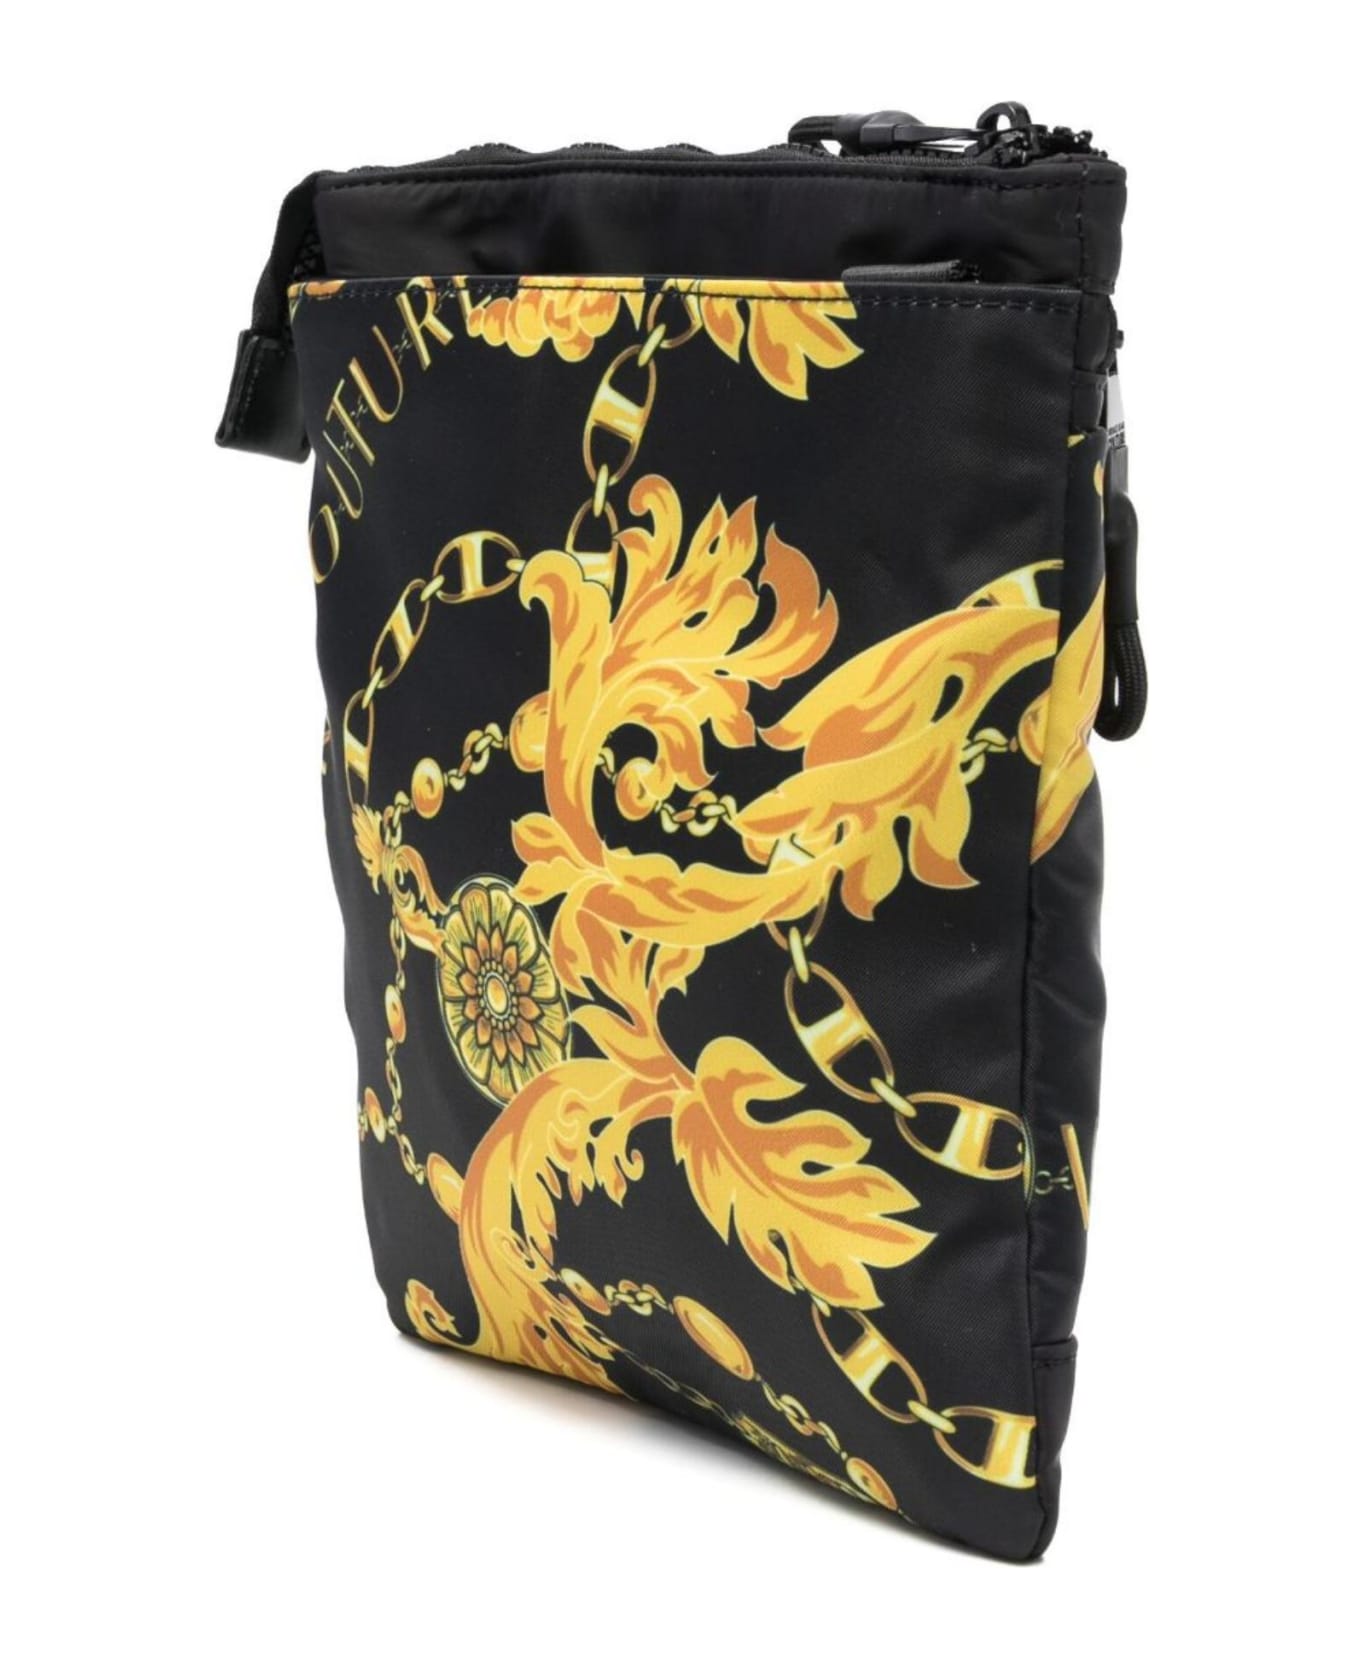 Versace Jeans Couture Bag - BLACK/GOLD